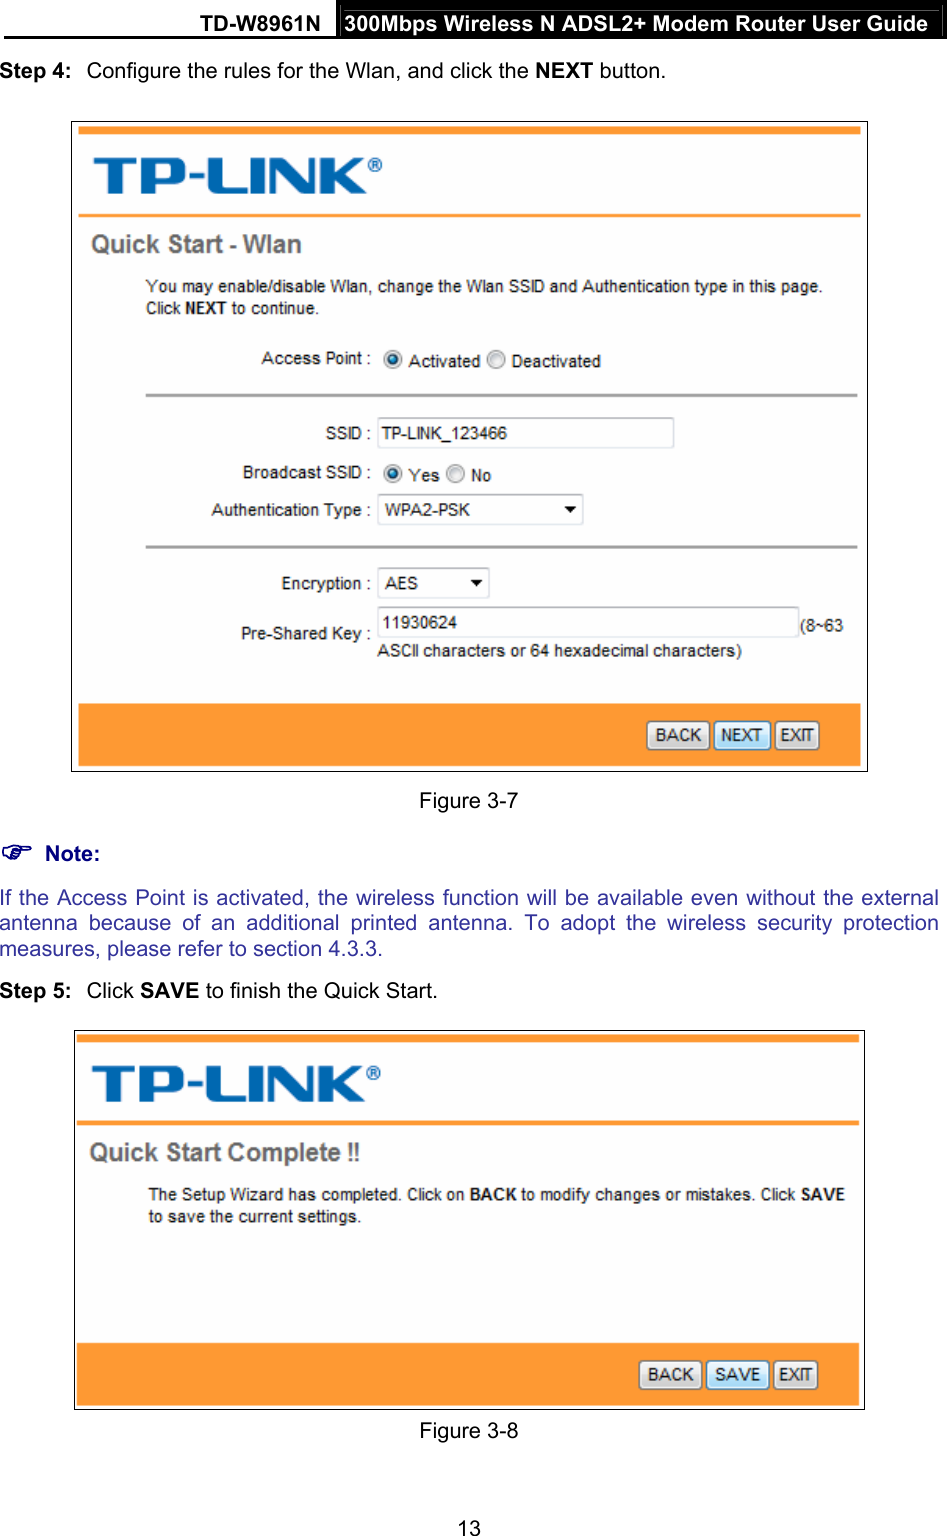 TD-W8961N  300Mbps Wireless N ADSL2+ Modem Router User Guide 13  Step 4:  Configure the rules for the Wlan, and click the NEXT button.  Figure 3-7  Note: If the Access Point is activated, the wireless function will be available even without the external antenna because of an additional printed antenna. To adopt the wireless security protection measures, please refer to section 4.3.3. Step 5:  Click SAVE to finish the Quick Start.  Figure 3-8 